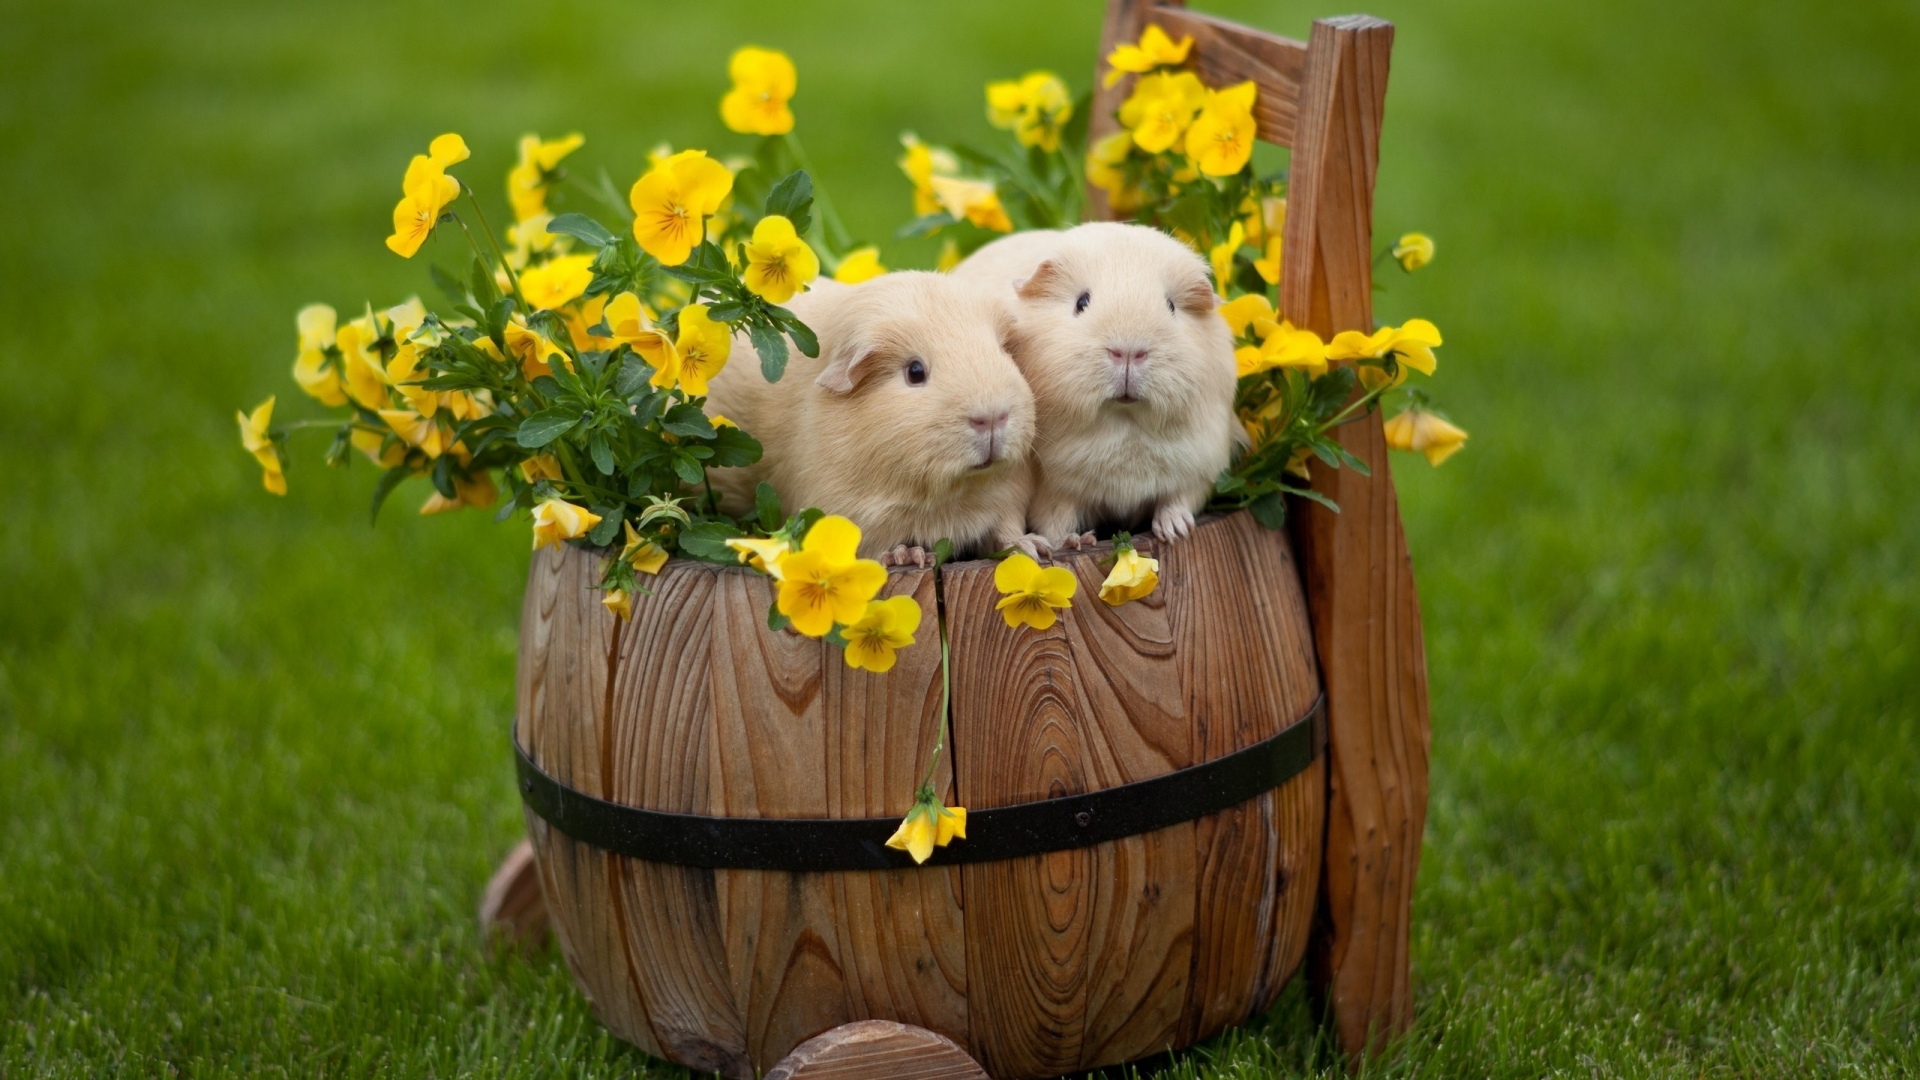 Happy Easter Rabbits for 1920 x 1080 HDTV 1080p resolution